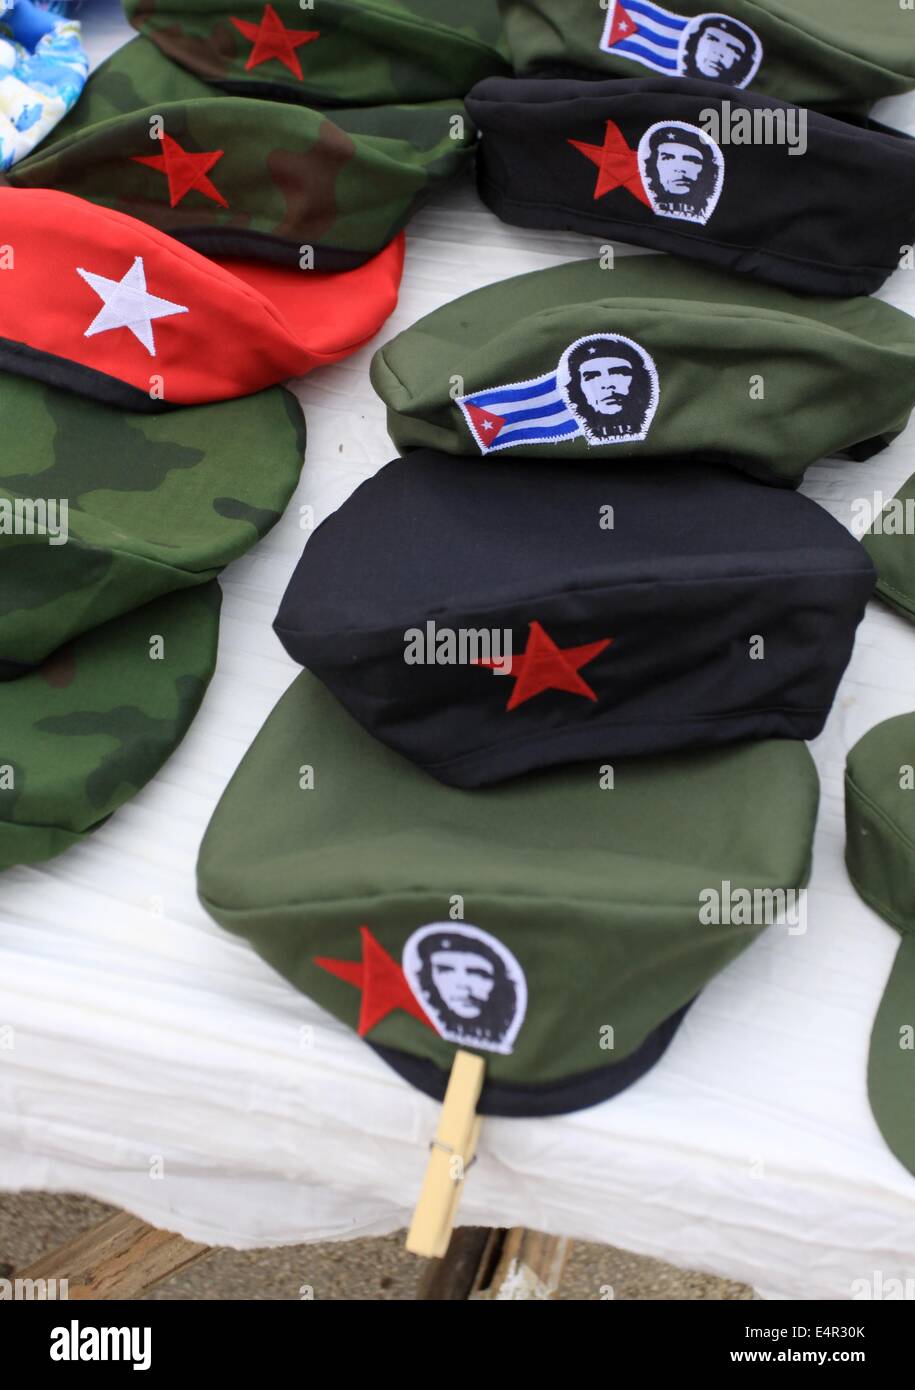 Typical Cuban souvenirs - berets with the red star and a depiction